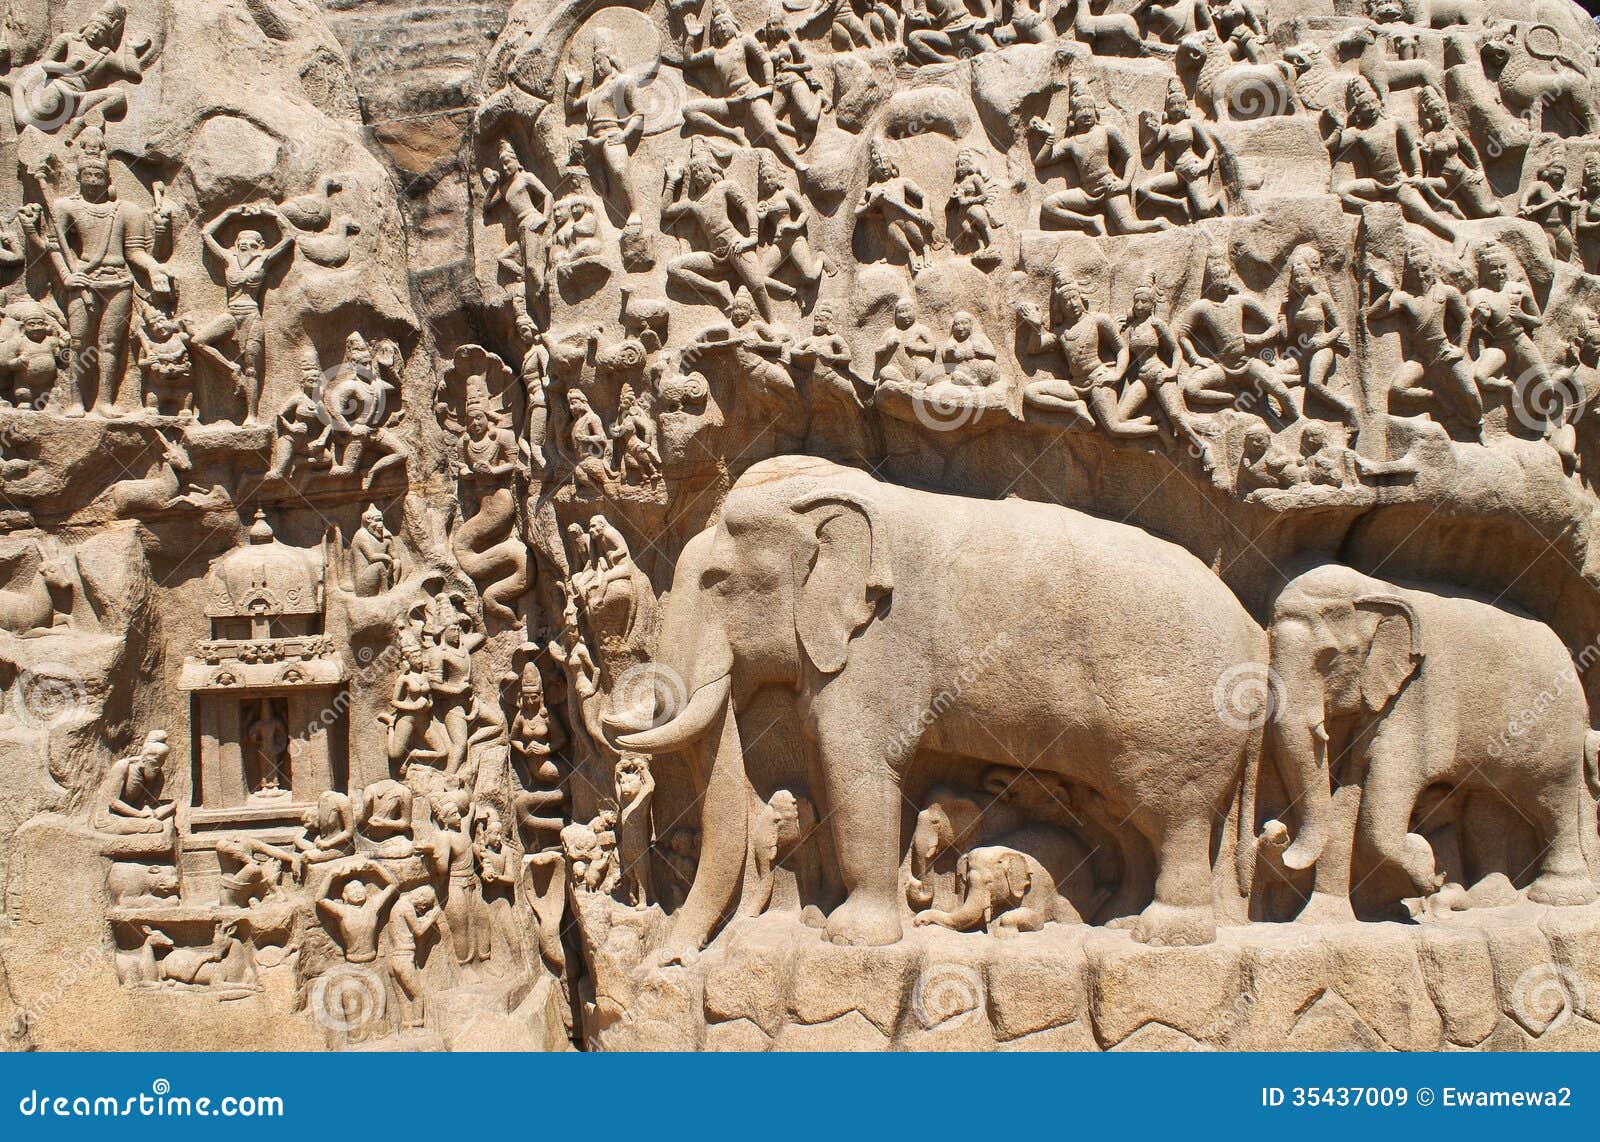 details of descent of the ganges in mahabalipuram, india